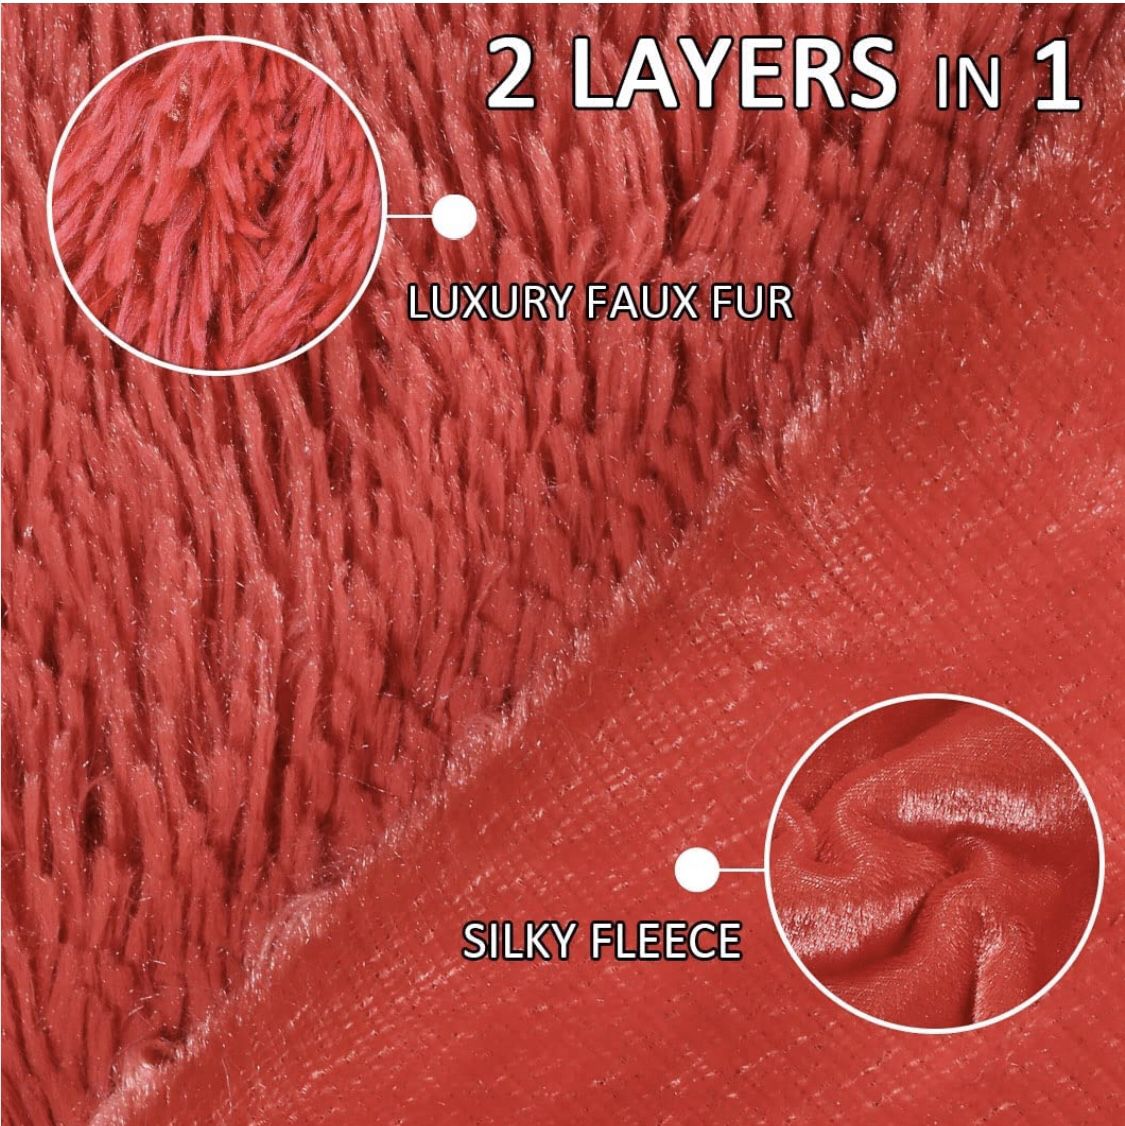 Thick Red Faux Fur Throw Winter Blanket,2 Layers,50" x 60",Soft Fluffy Fuzzy Cozy Blanket for Sofa Chair Couch Bed Farmhouse Decrations Photoshoot Pro